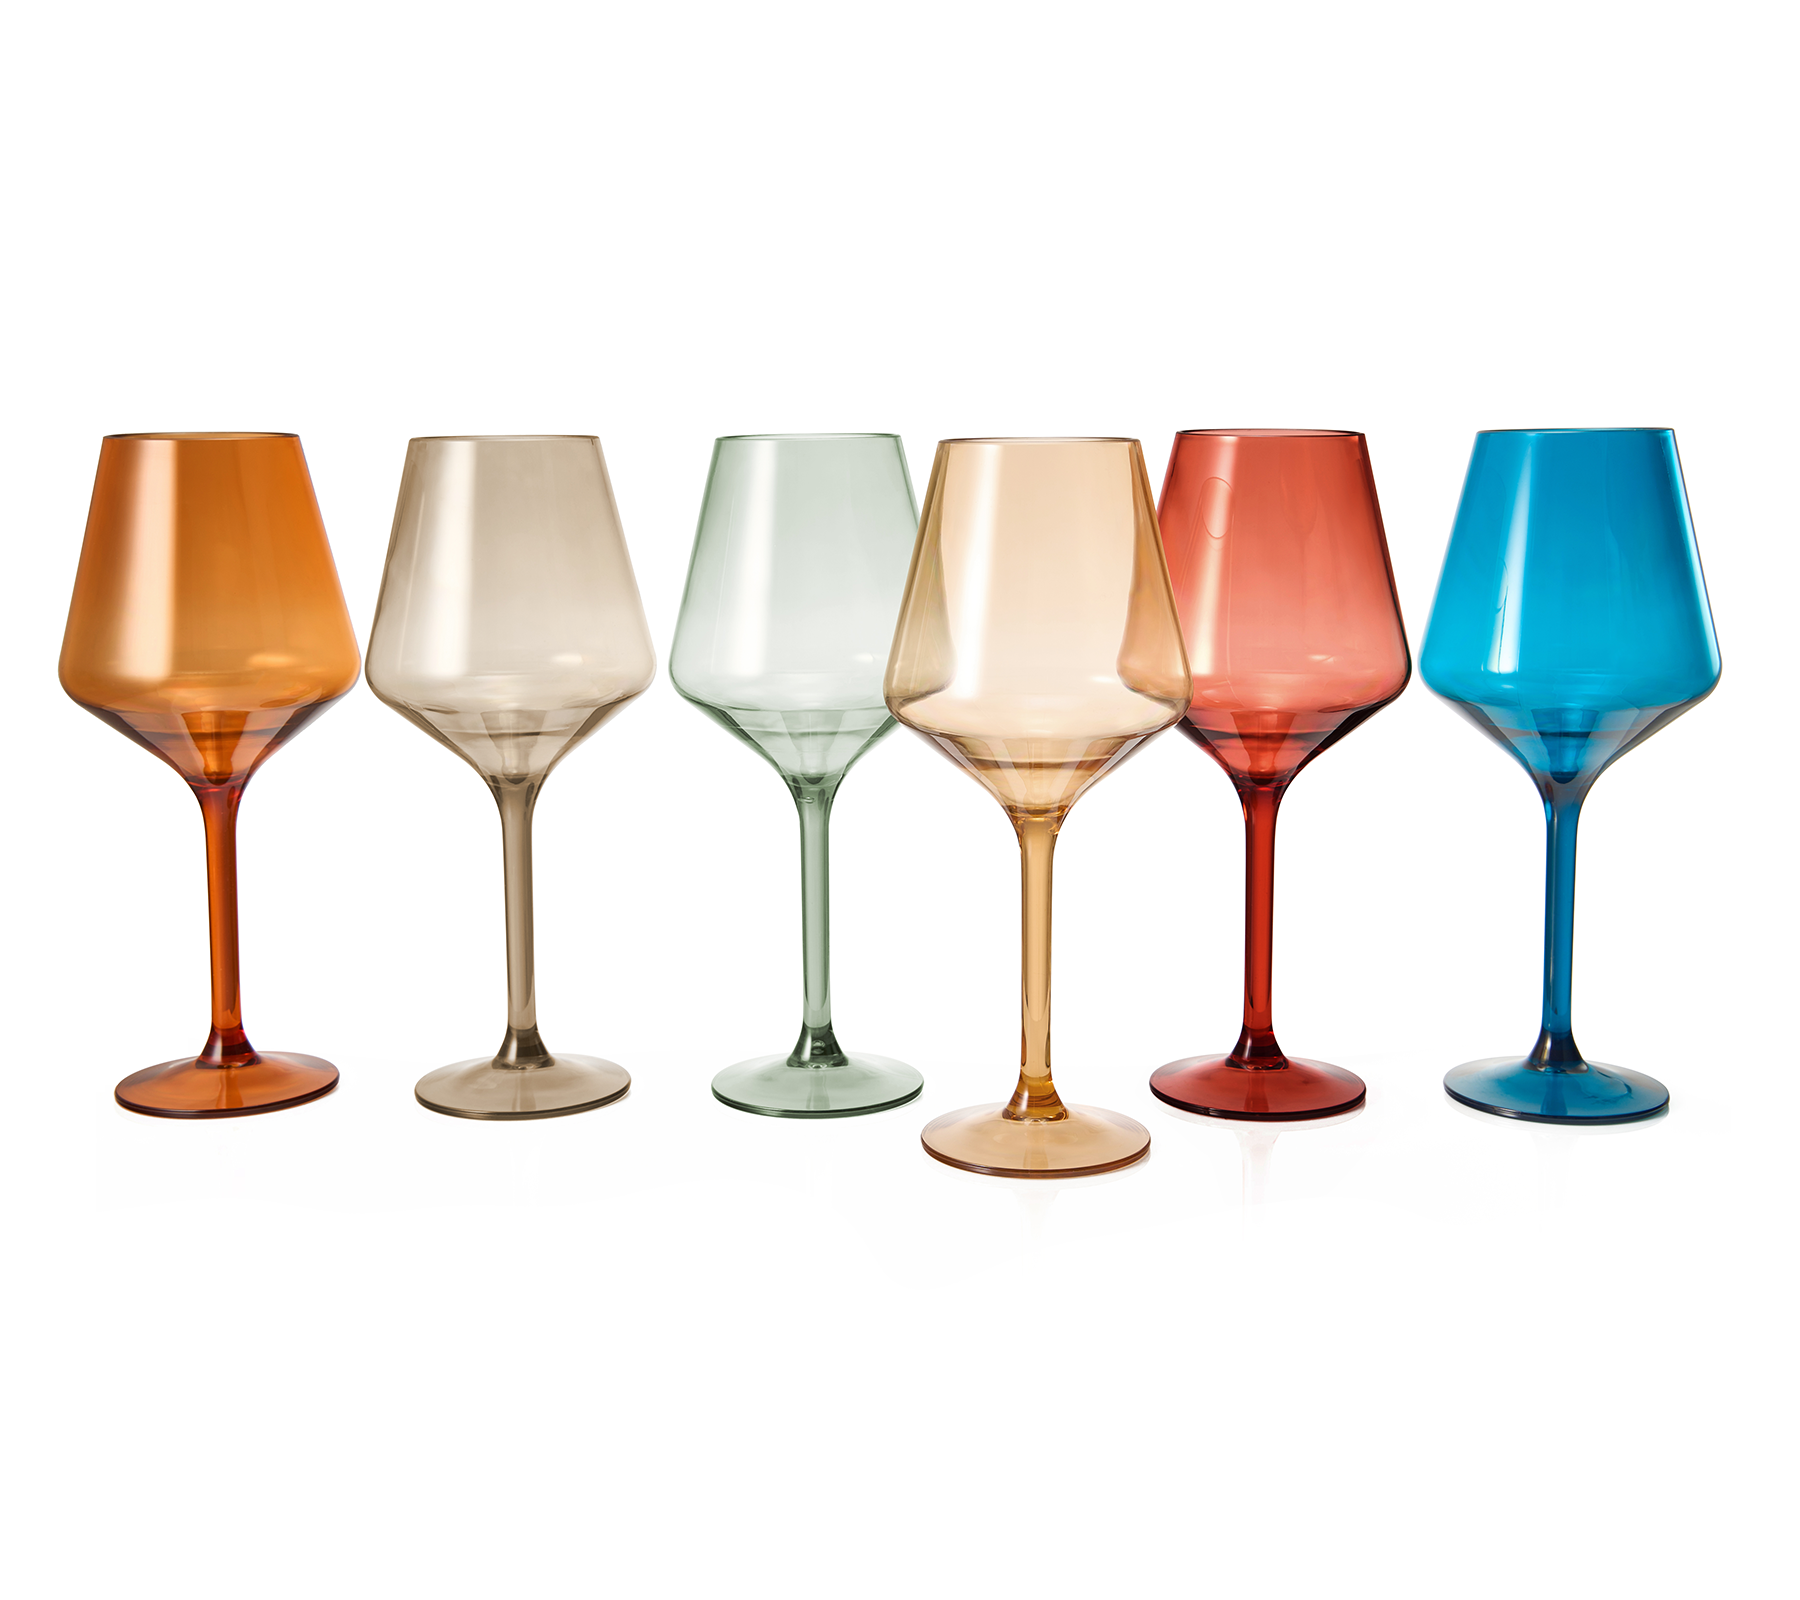 Khen's Shatterproof Vibrant Colored Tall Acrylic Drinking Glasses,  Luxurious & Stylish, Unique Home Bar Addition - 6 pk